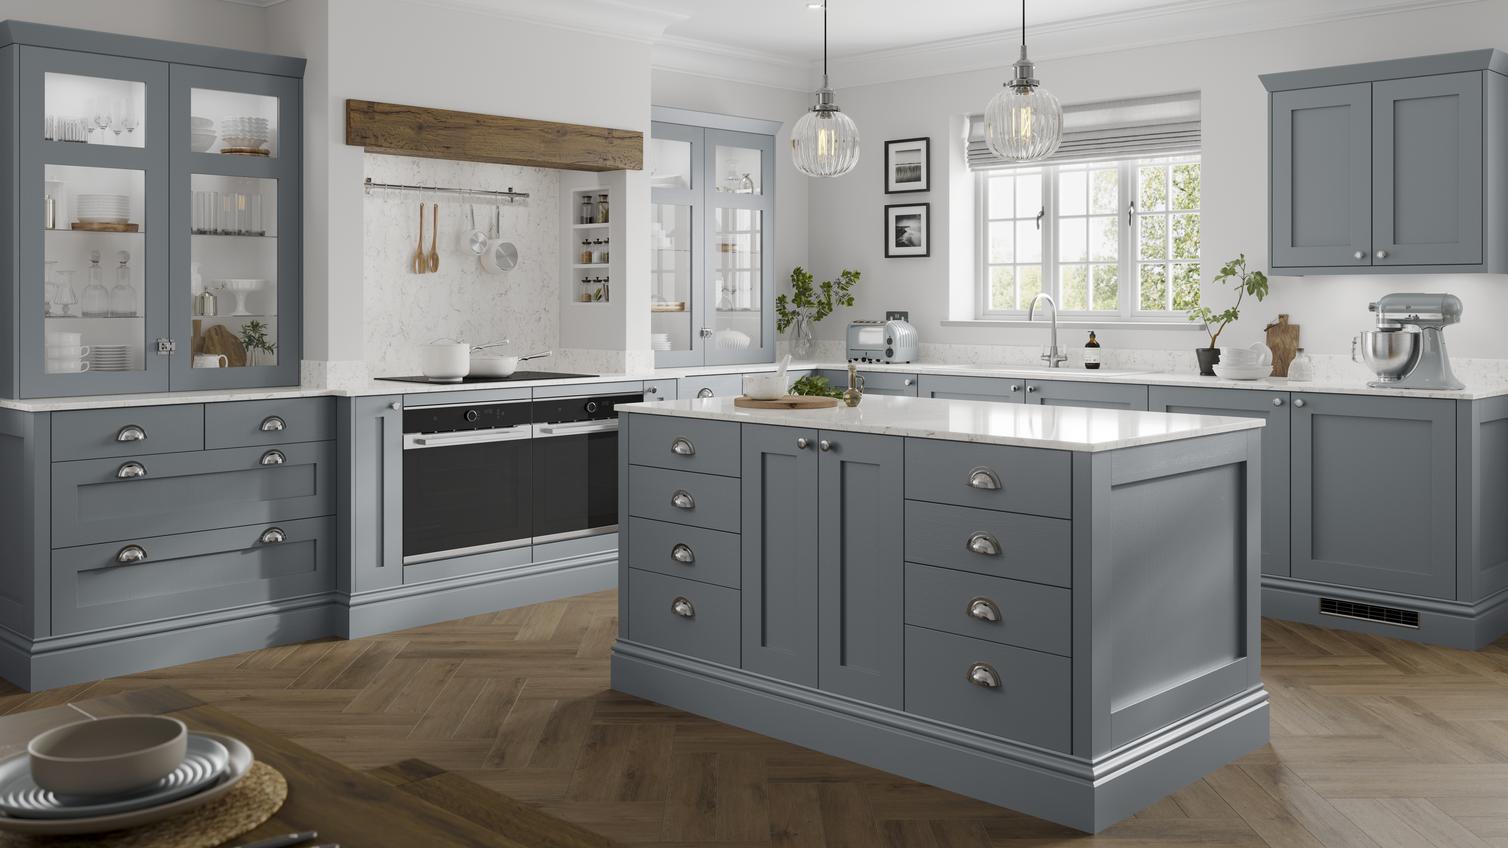 A blue shaker kitchen idea in an L-shaped layout with island. Includes white worktops, glass cabinets, and chrome handles.